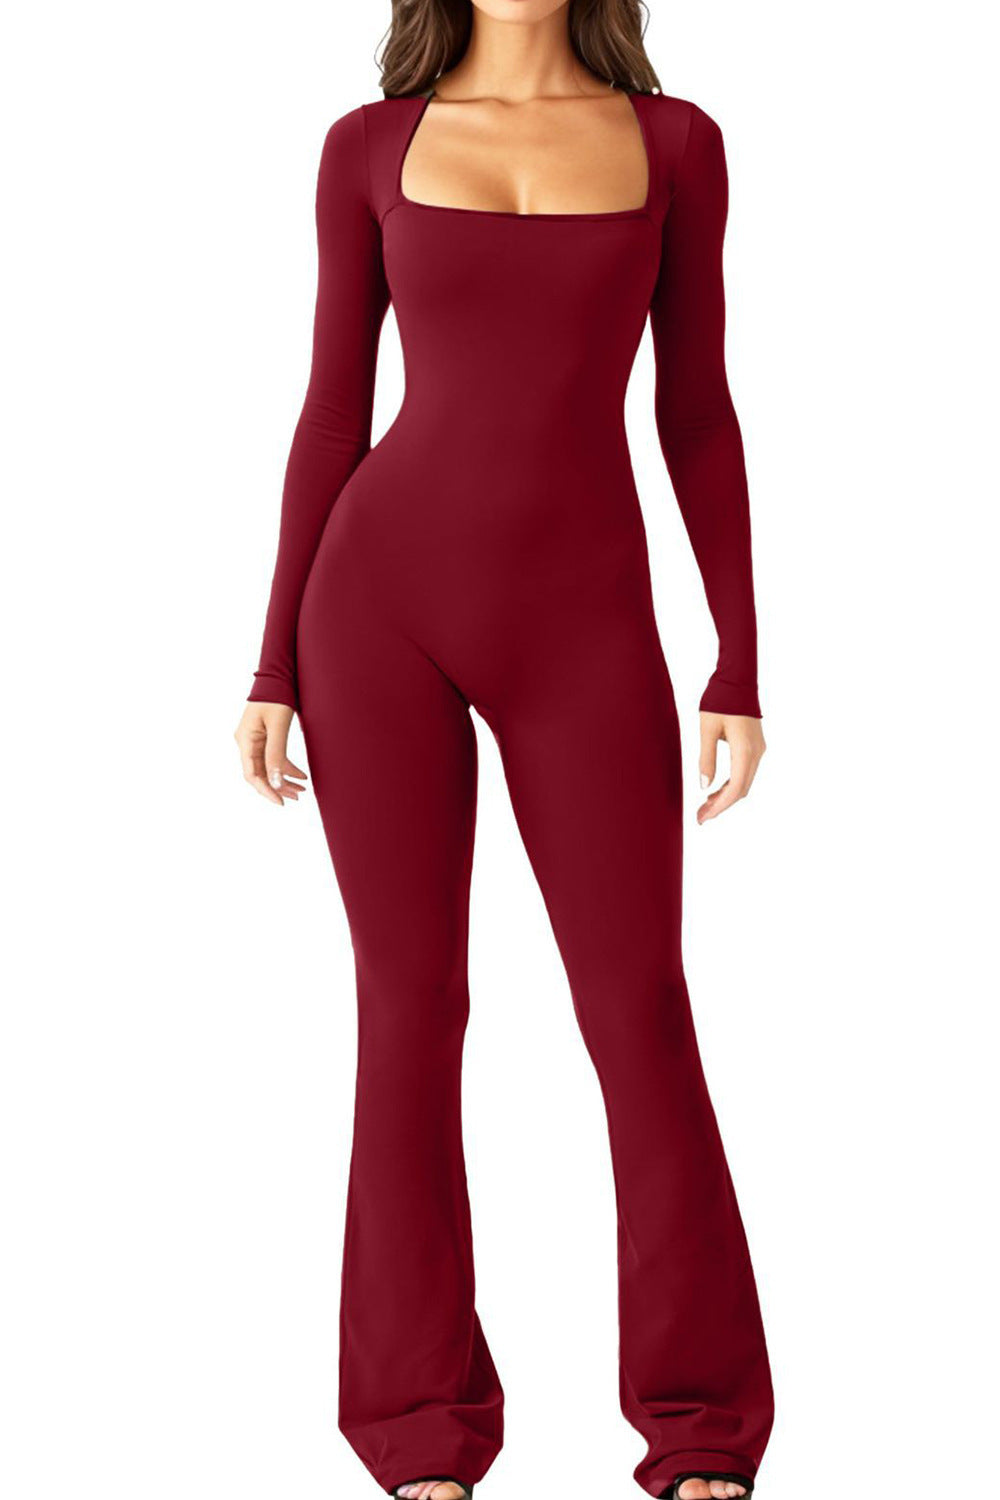 Women's Sleeve Belly Waist Shaping Hip Lift Square Collar Wide Jumpsuits